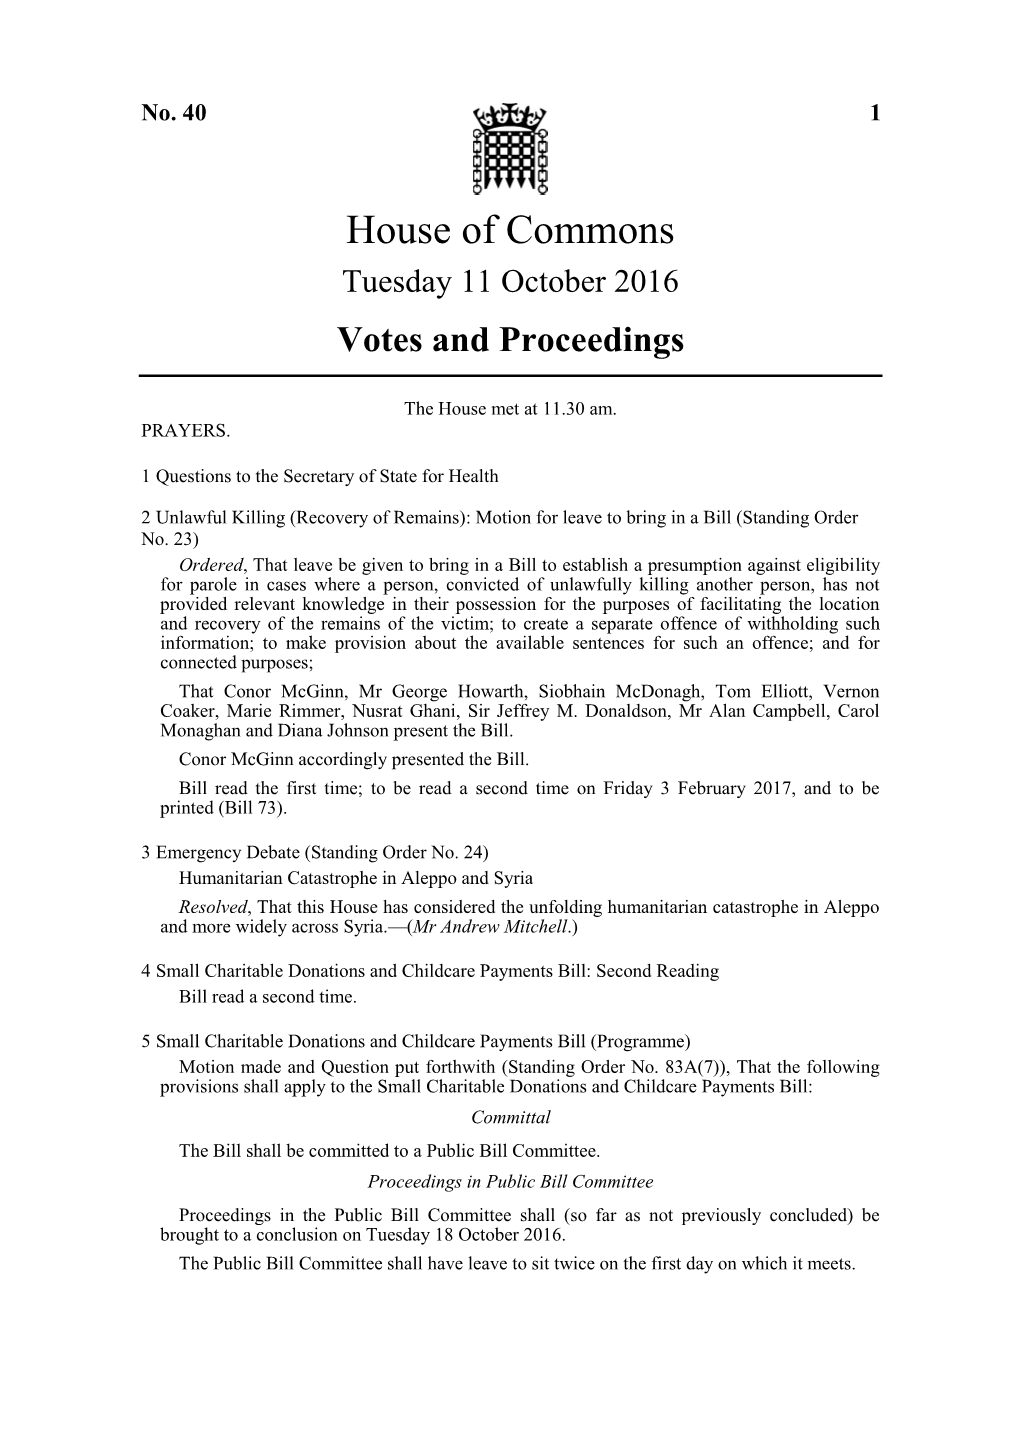 House of Commons Tuesday 11 October 2016 Votes and Proceedings